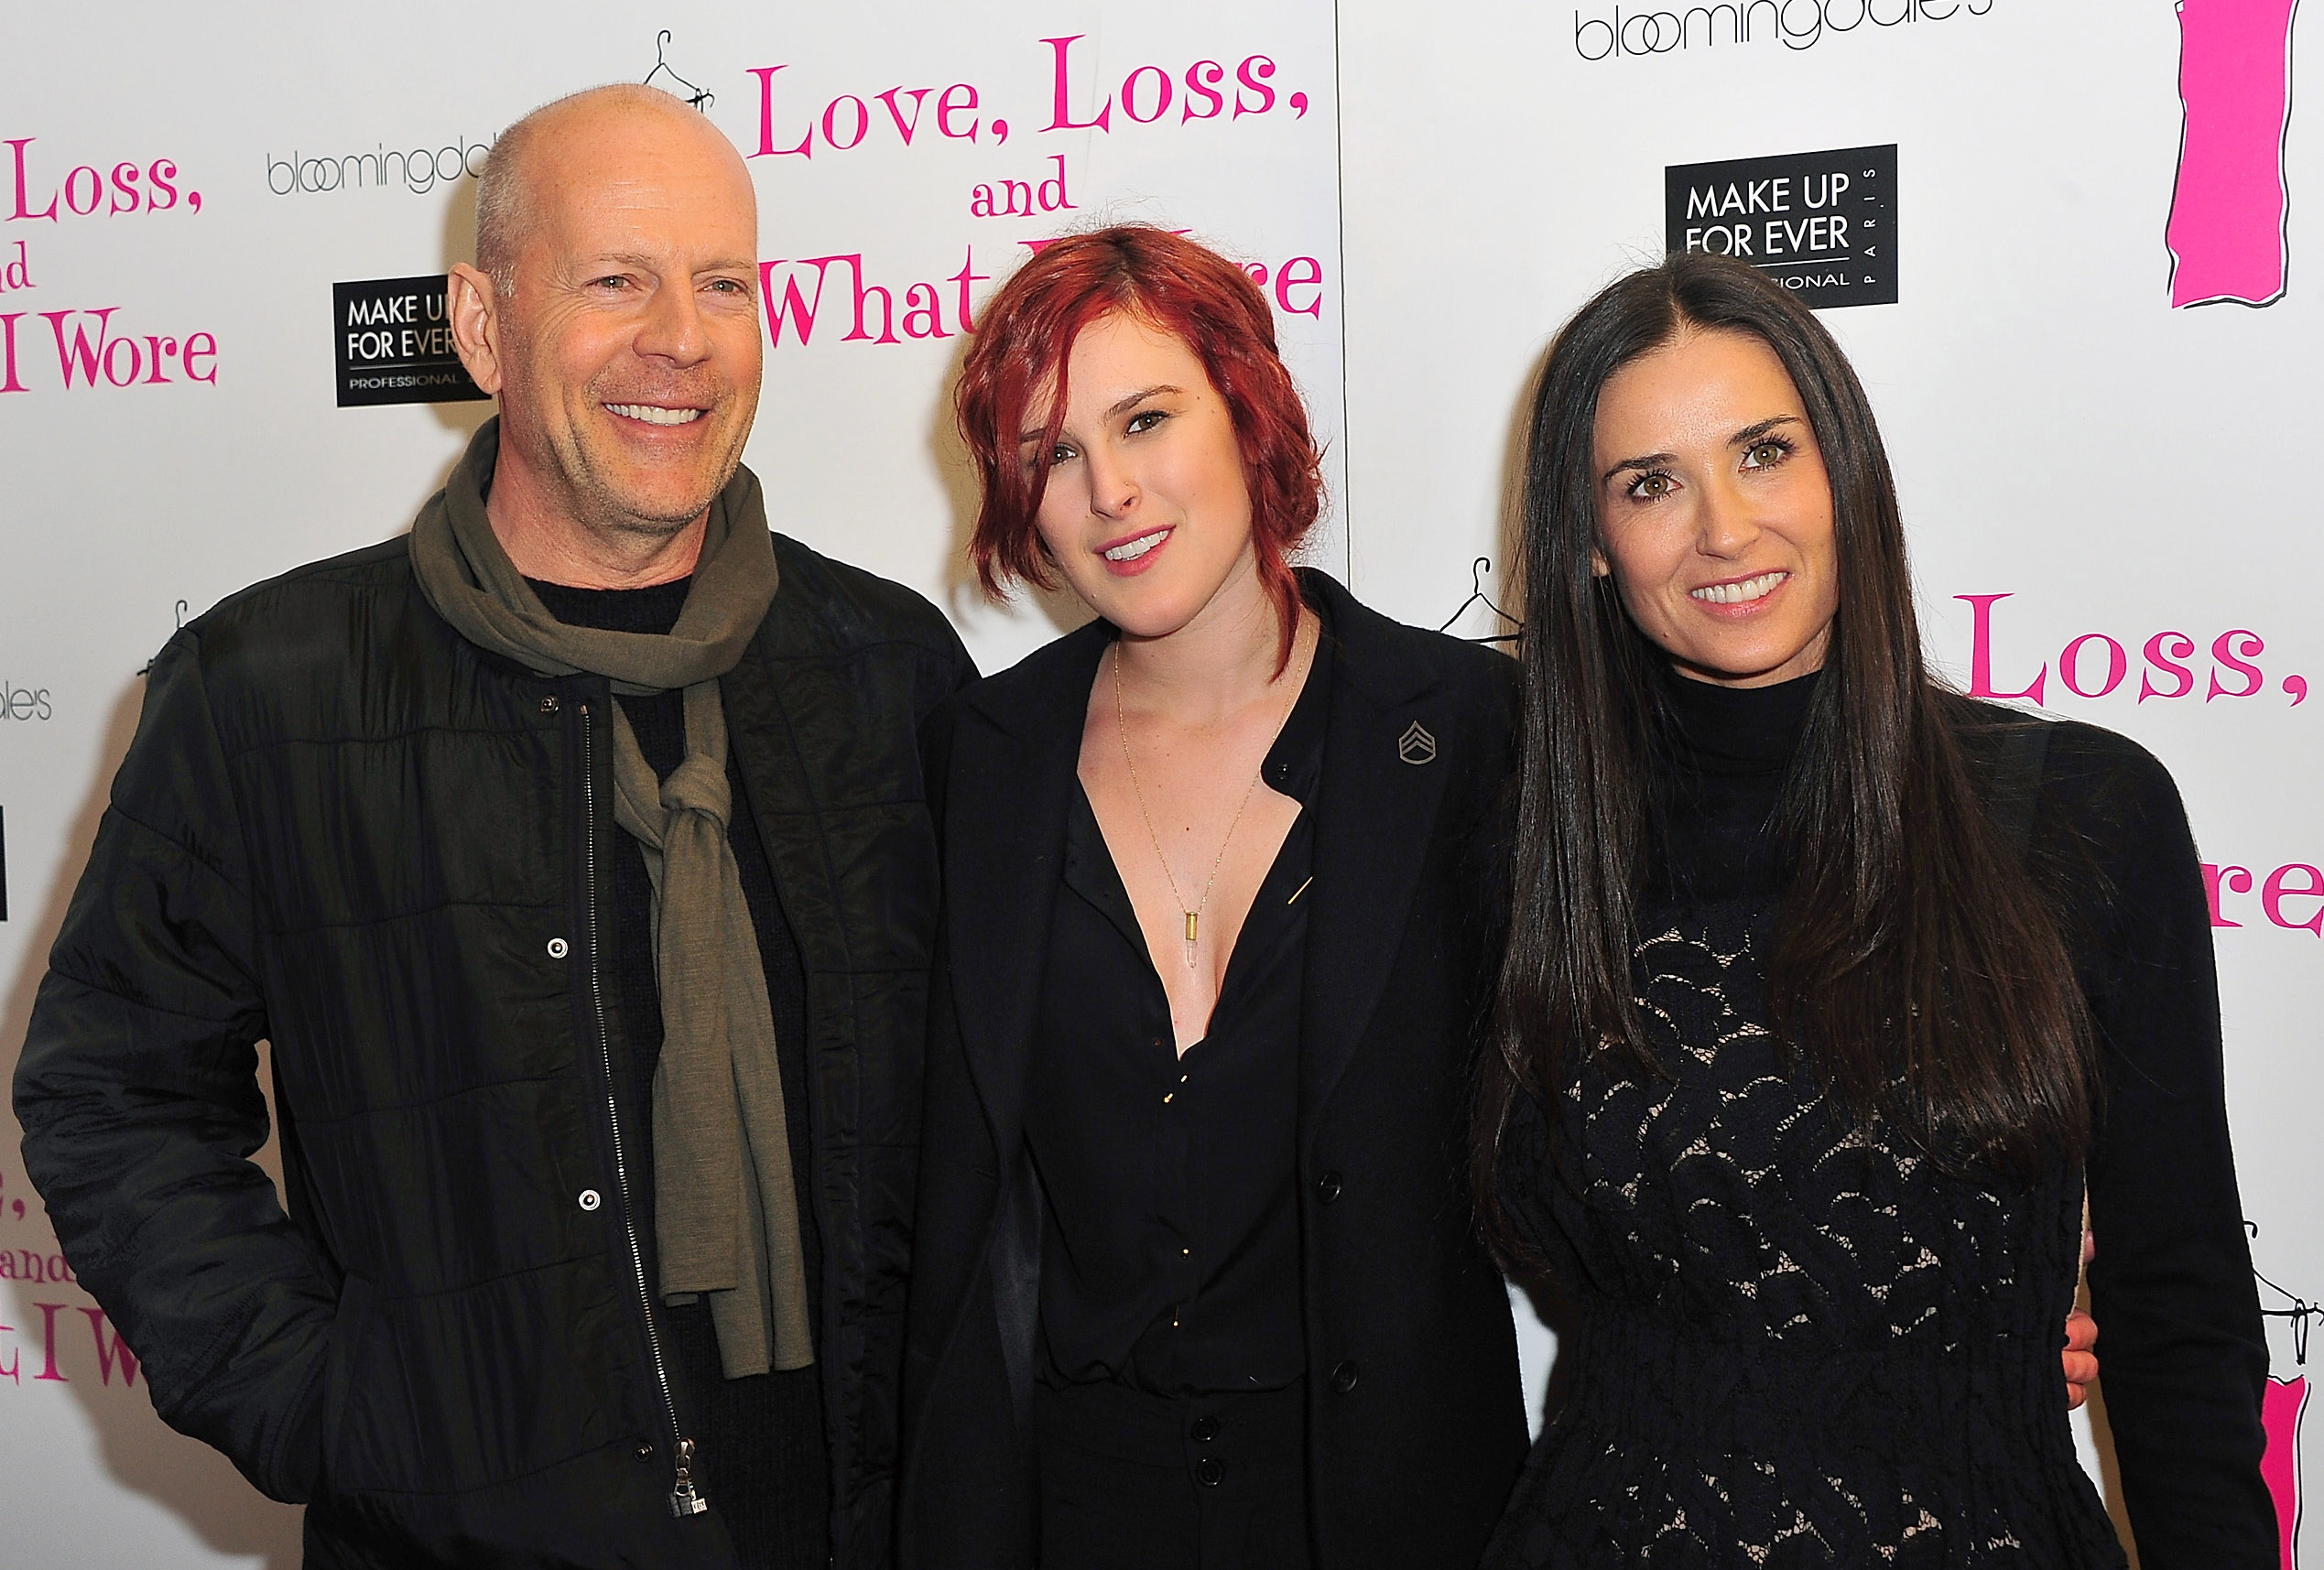 Bruce Willis, Rumer Willis, and Demi Moore pose at the "Love, Loss & What I Wore" new cast member celebration in New York City, on March 24, 2011. | Source: Getty Images